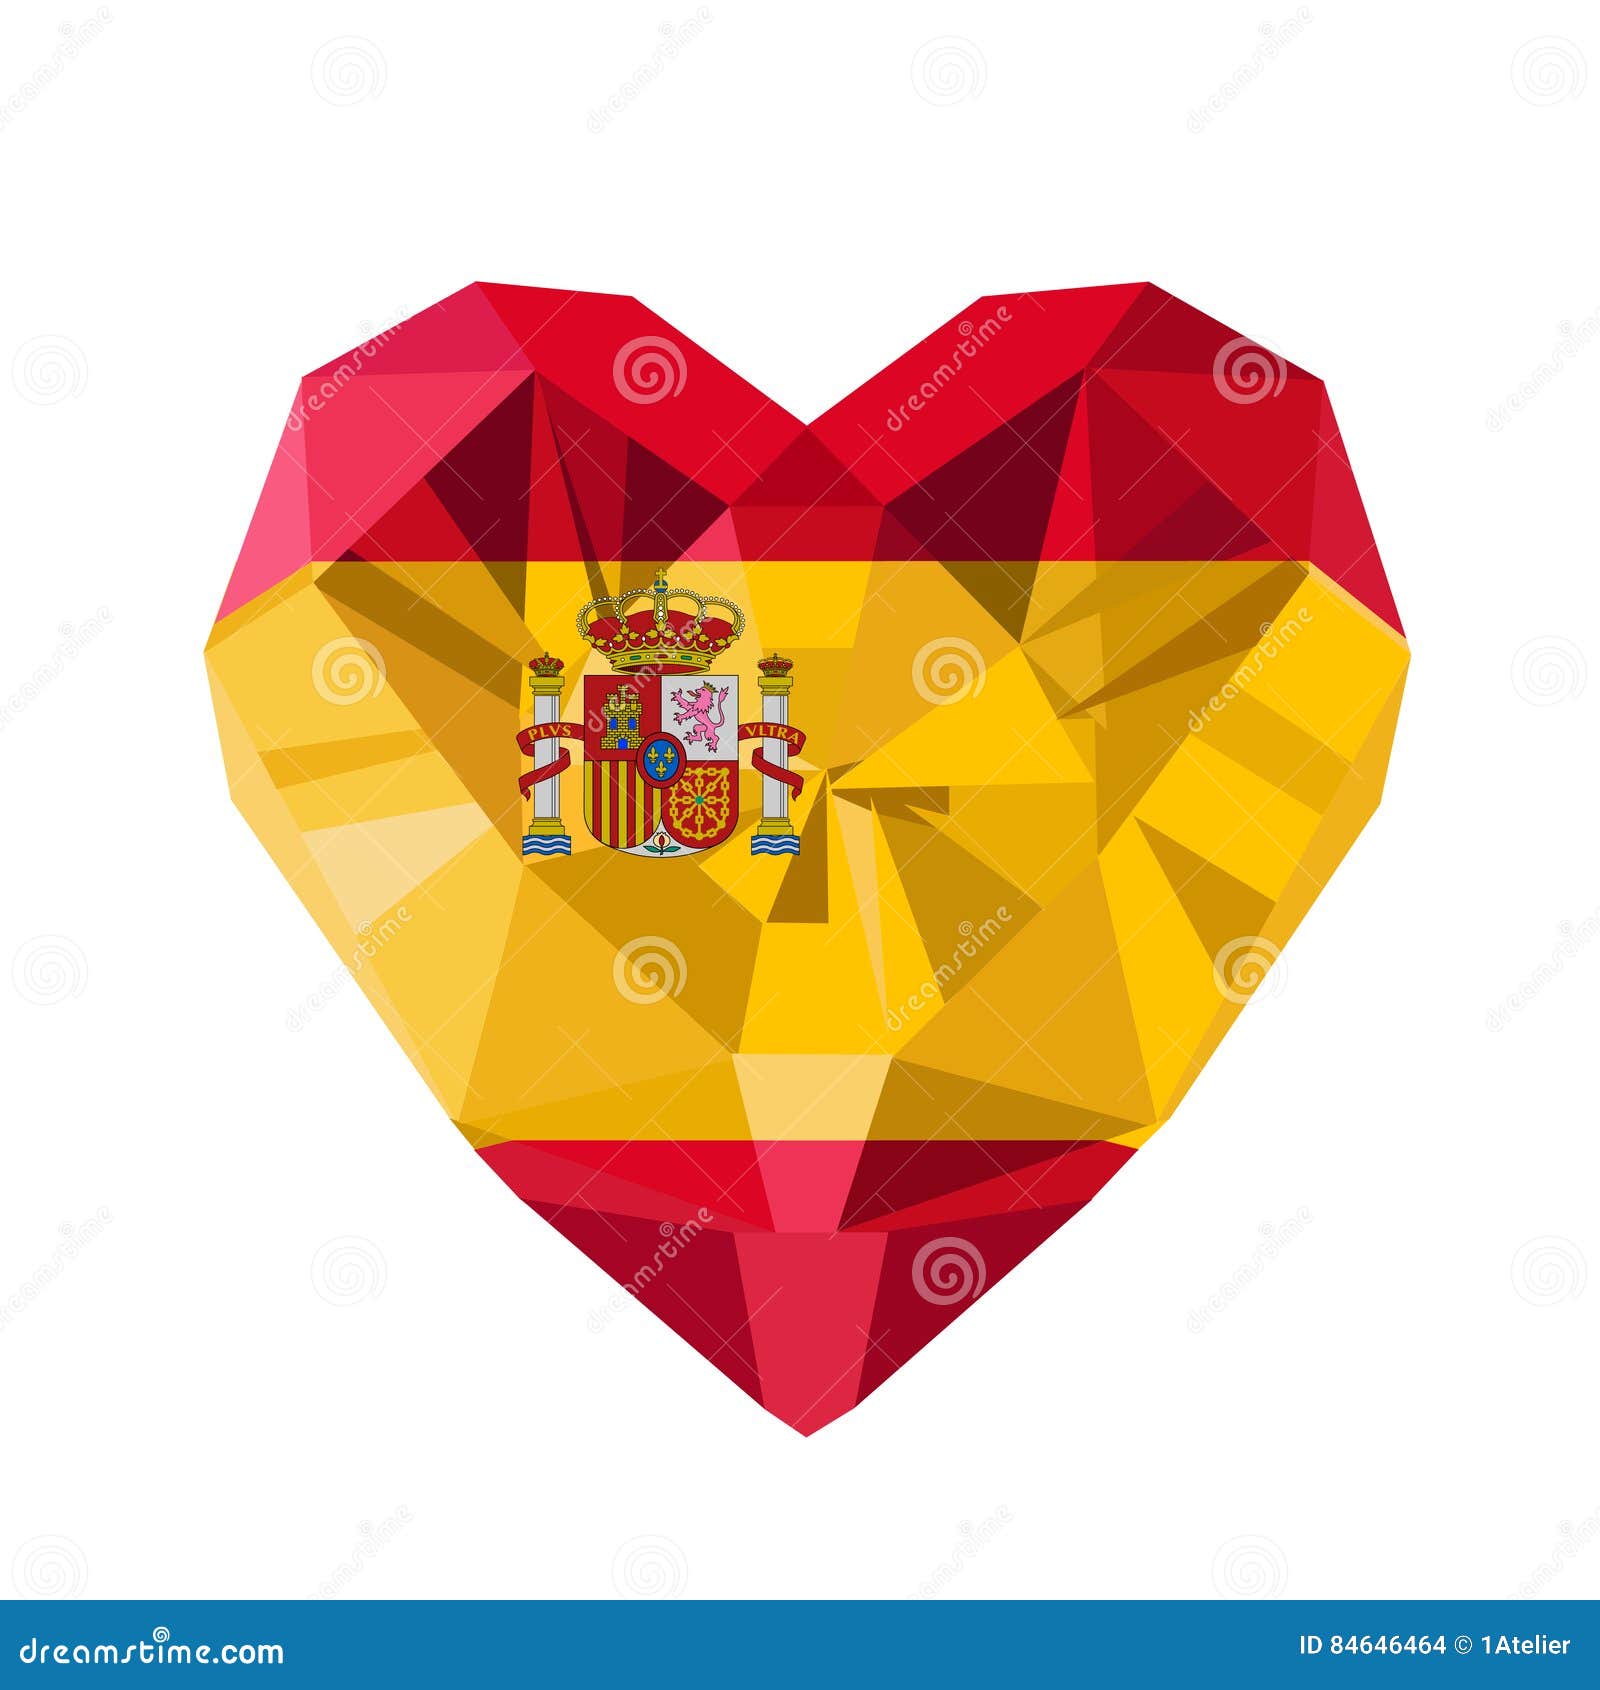  crystal gem jewelry spanish heart with the flag of the kingdom of spain.